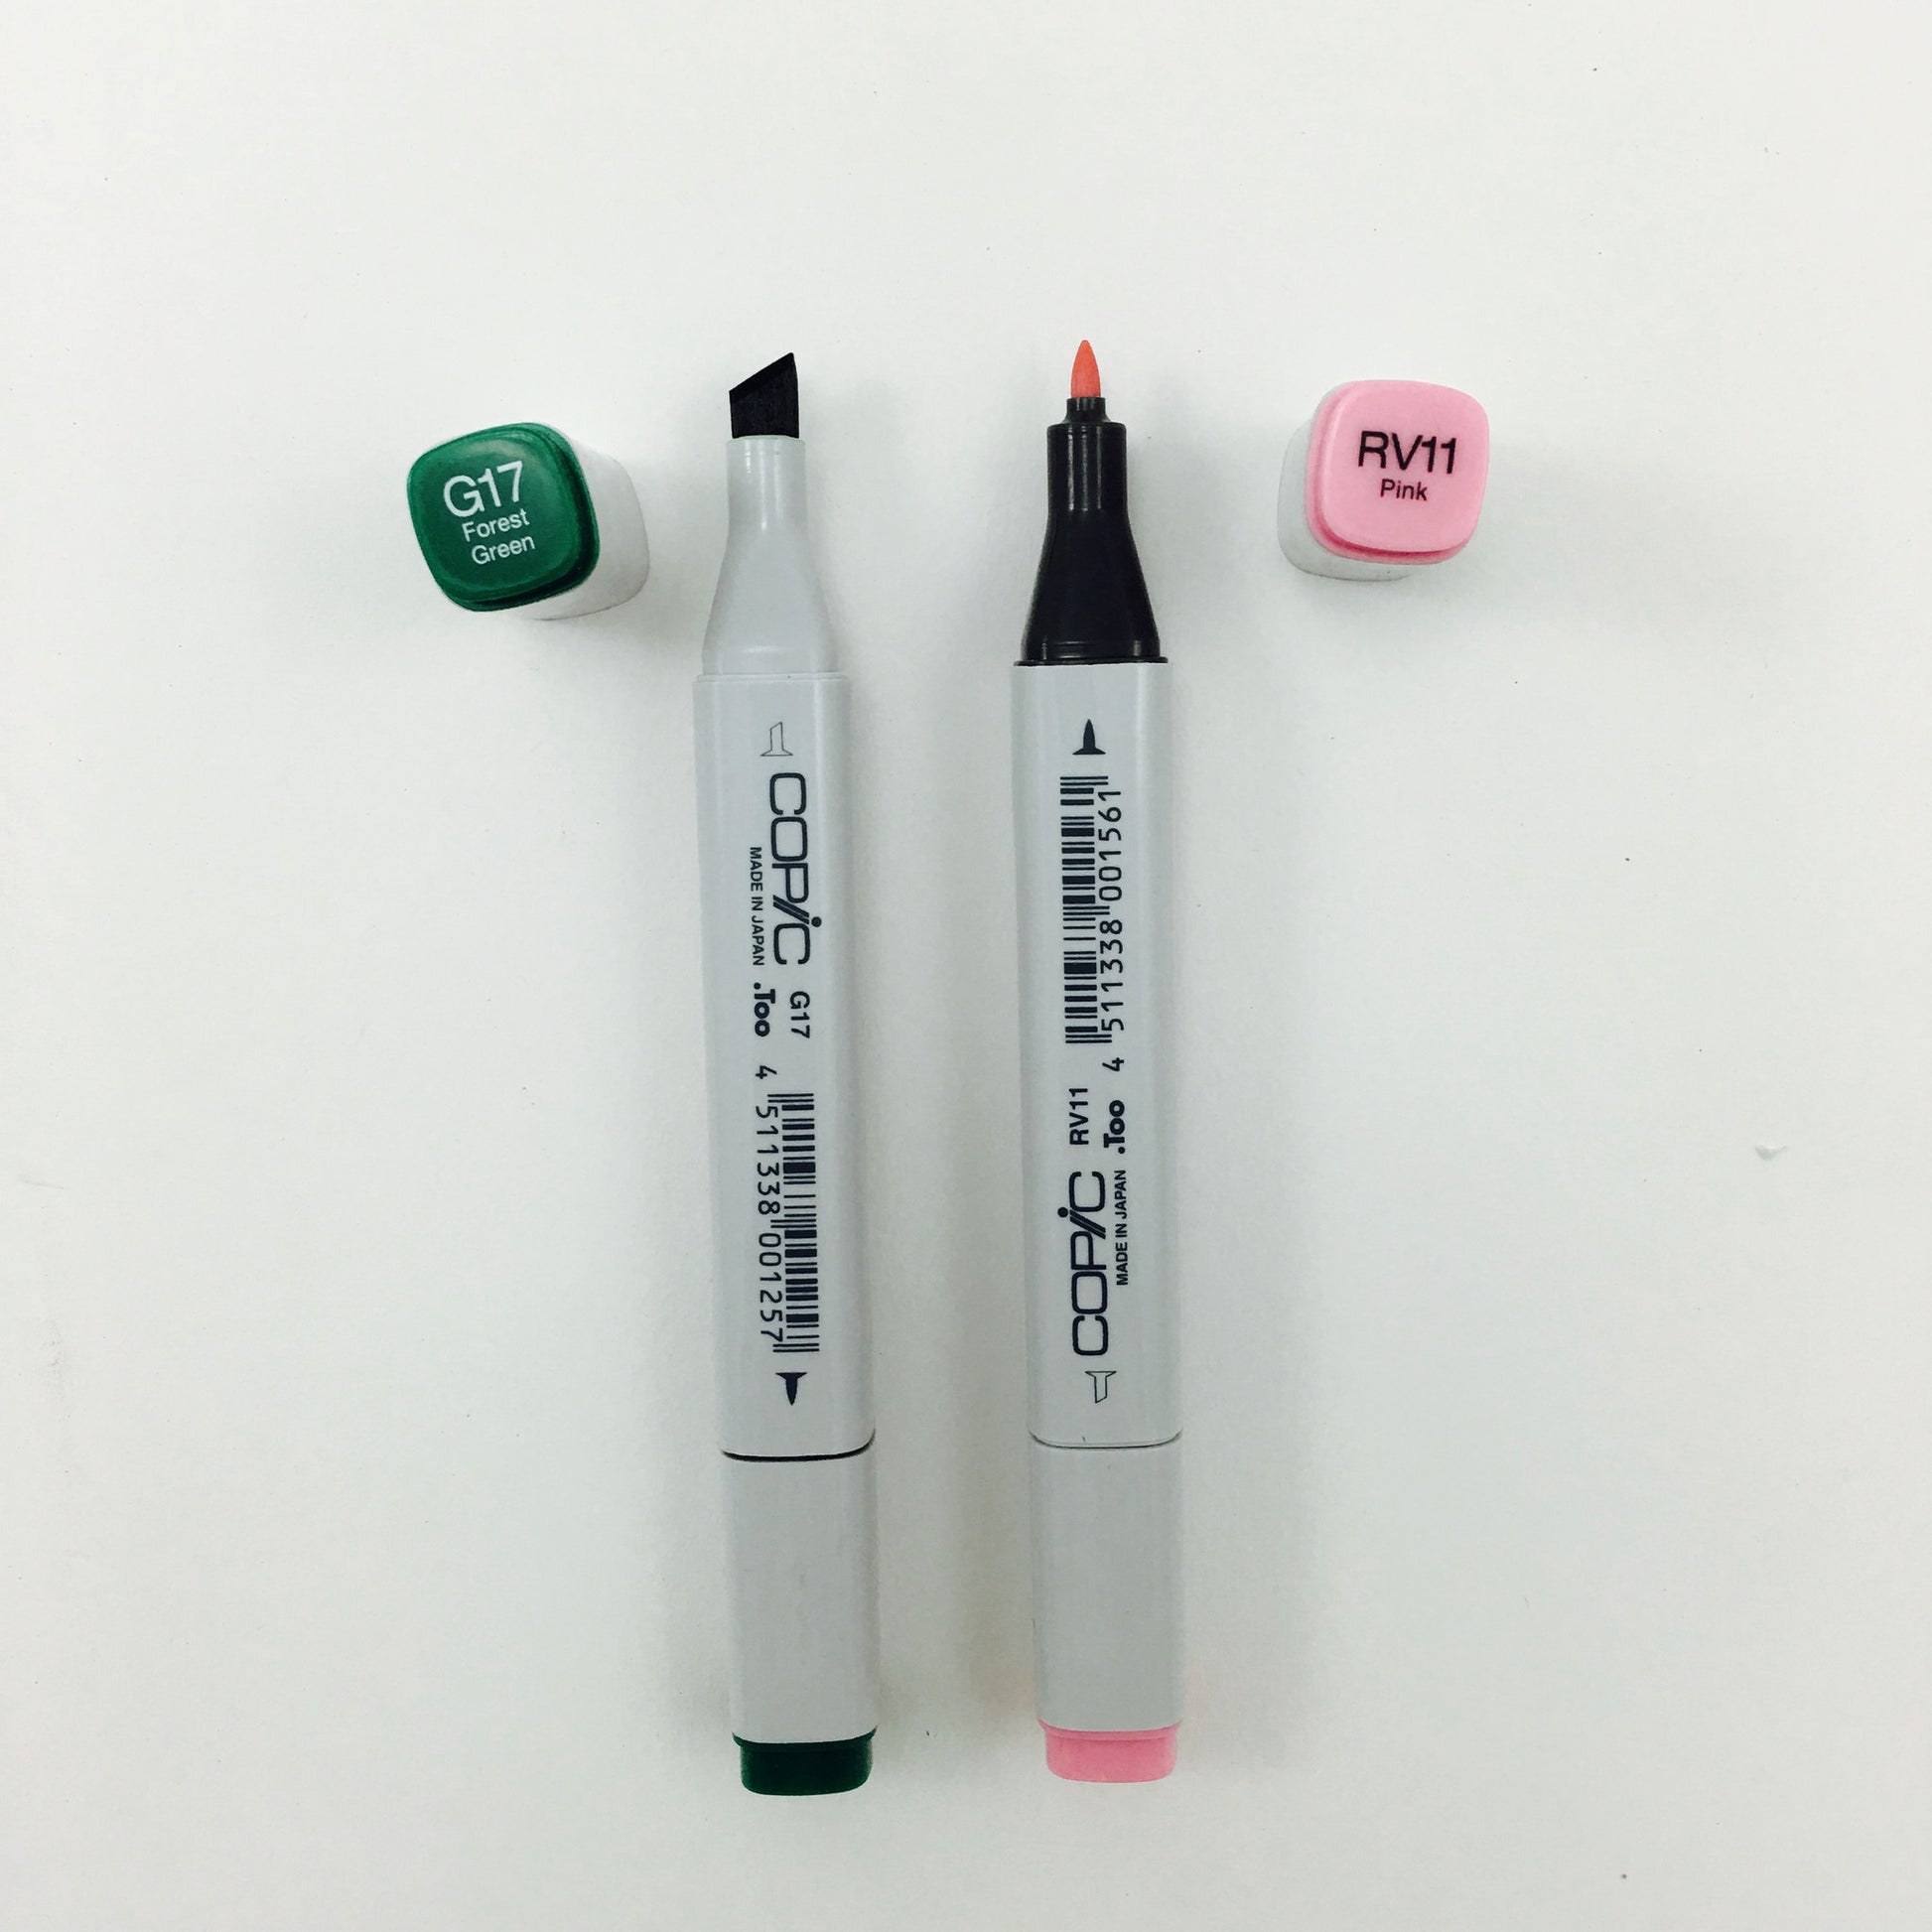 COPIC Classic Dual-Sided Artist Markers – K. A. Artist Shop